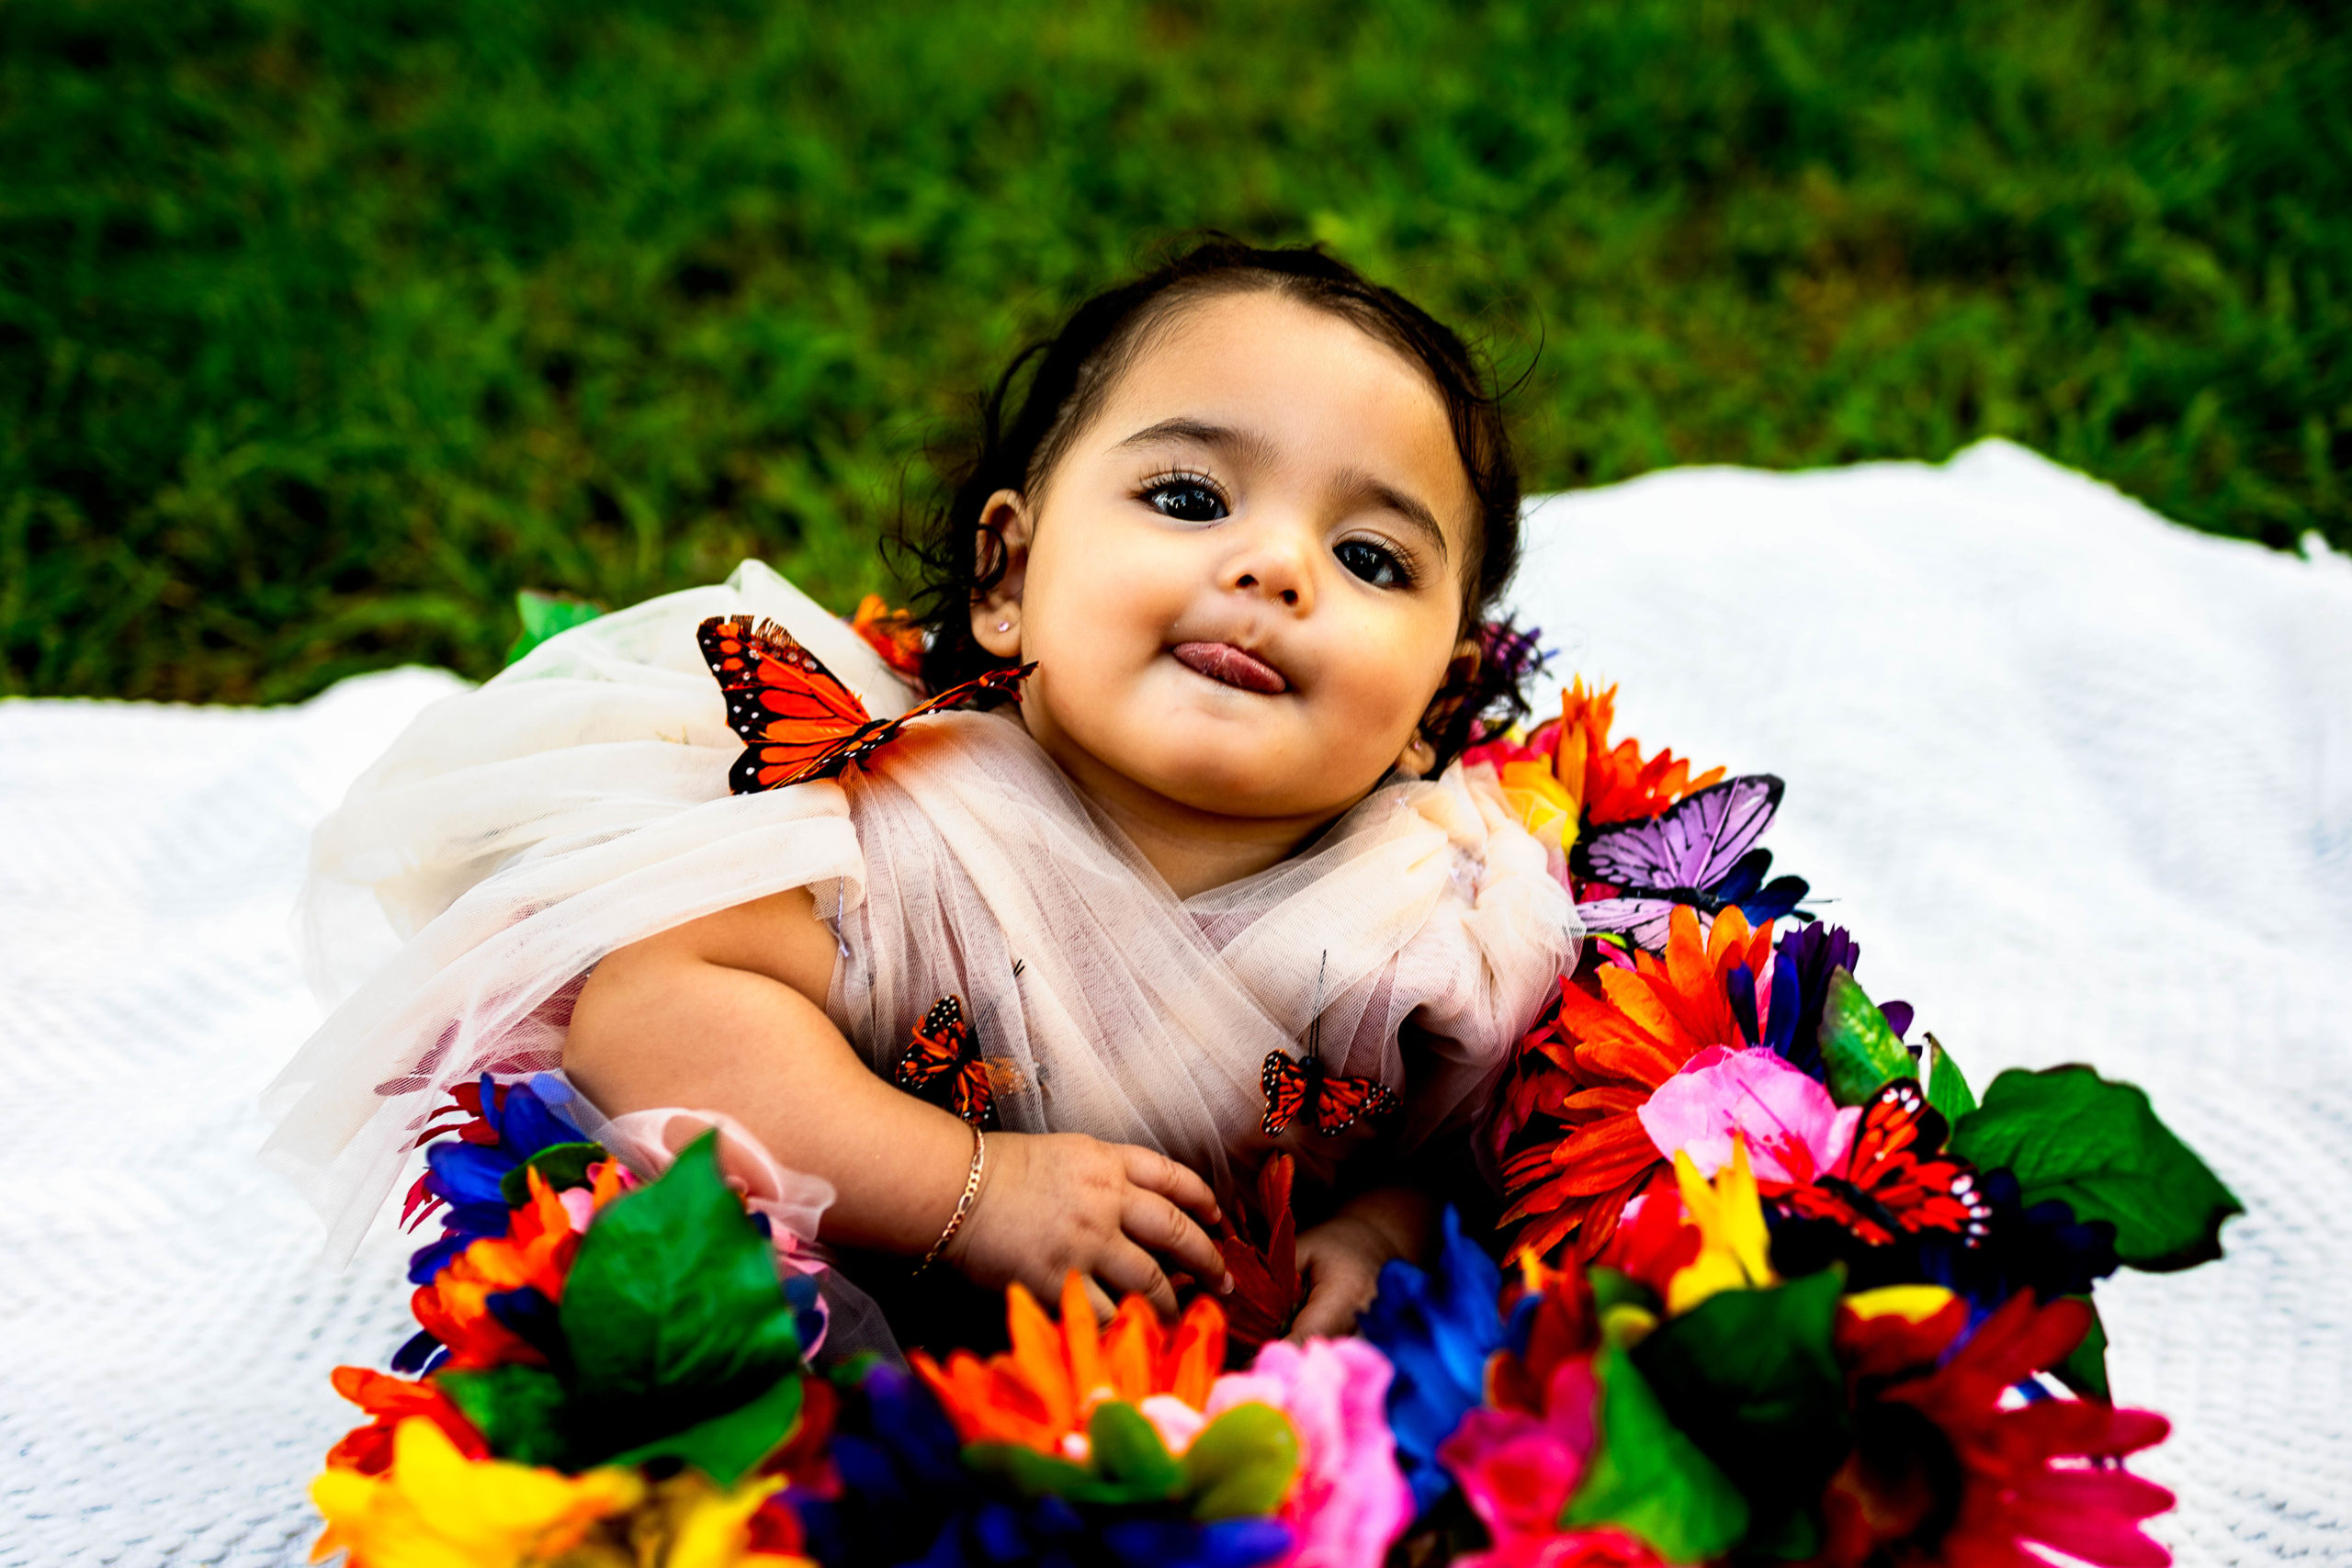 A baby girl sitting in a crate decorated with flowers and butterflys.